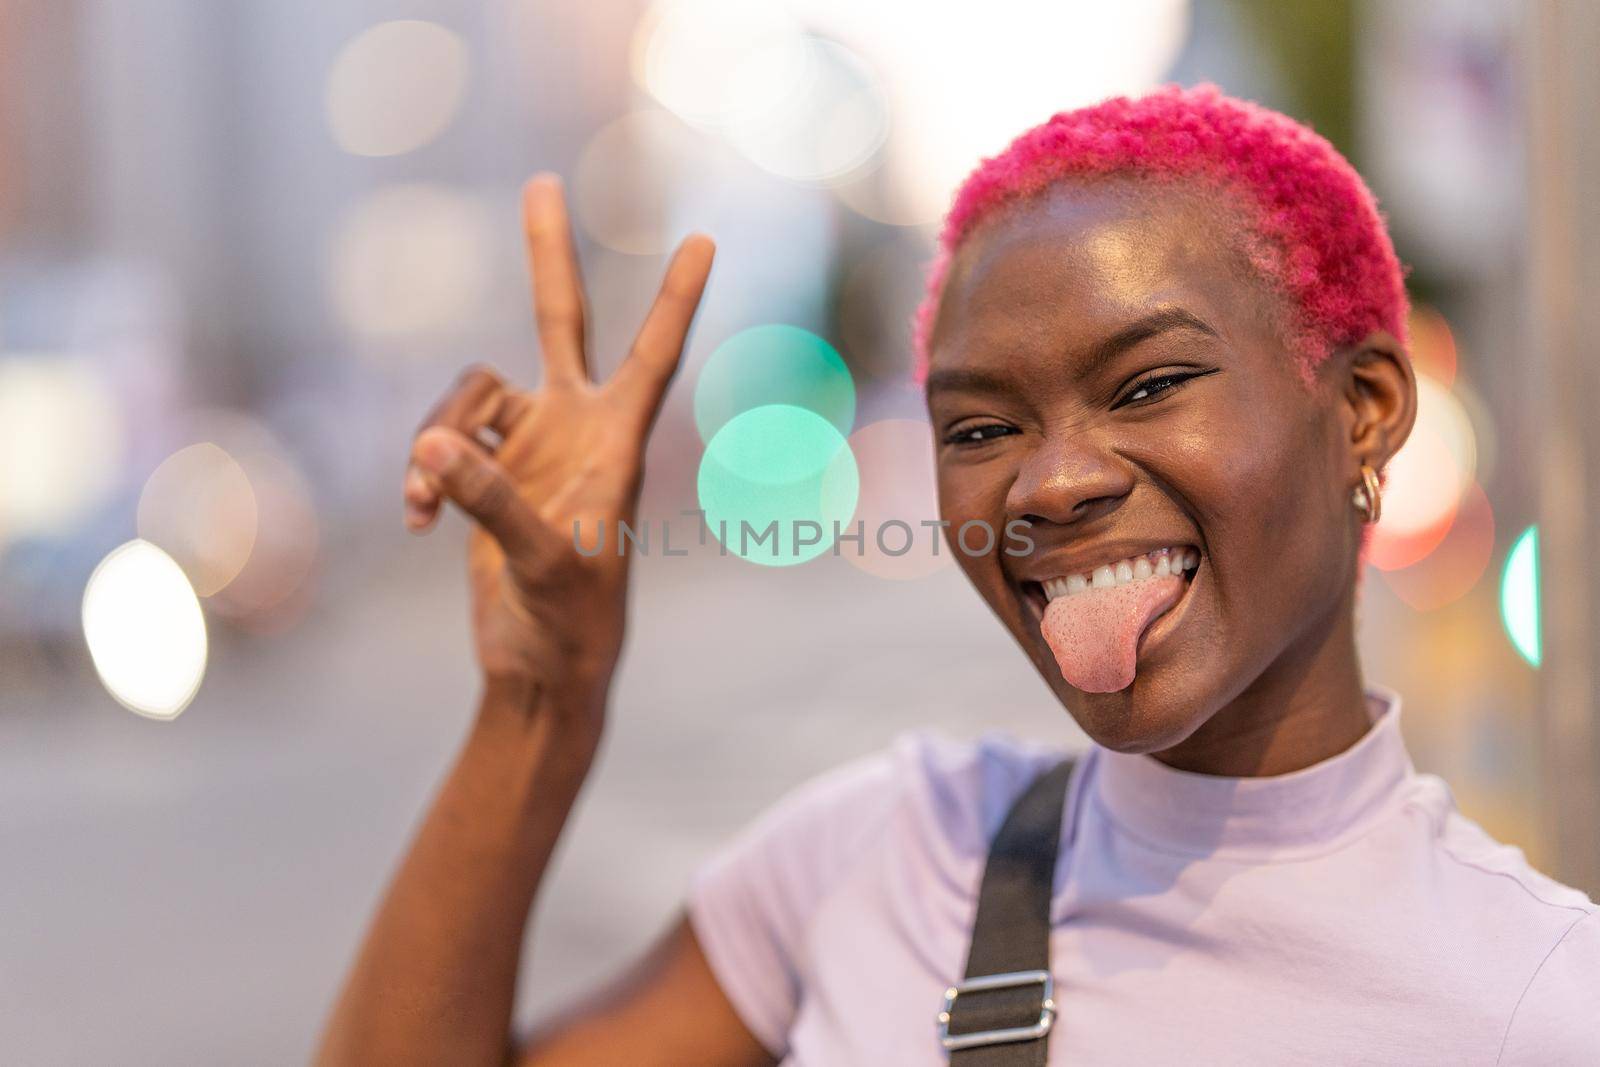 African woman with short pink hair grimacing at camera gesturing victory with two fingers outdoors